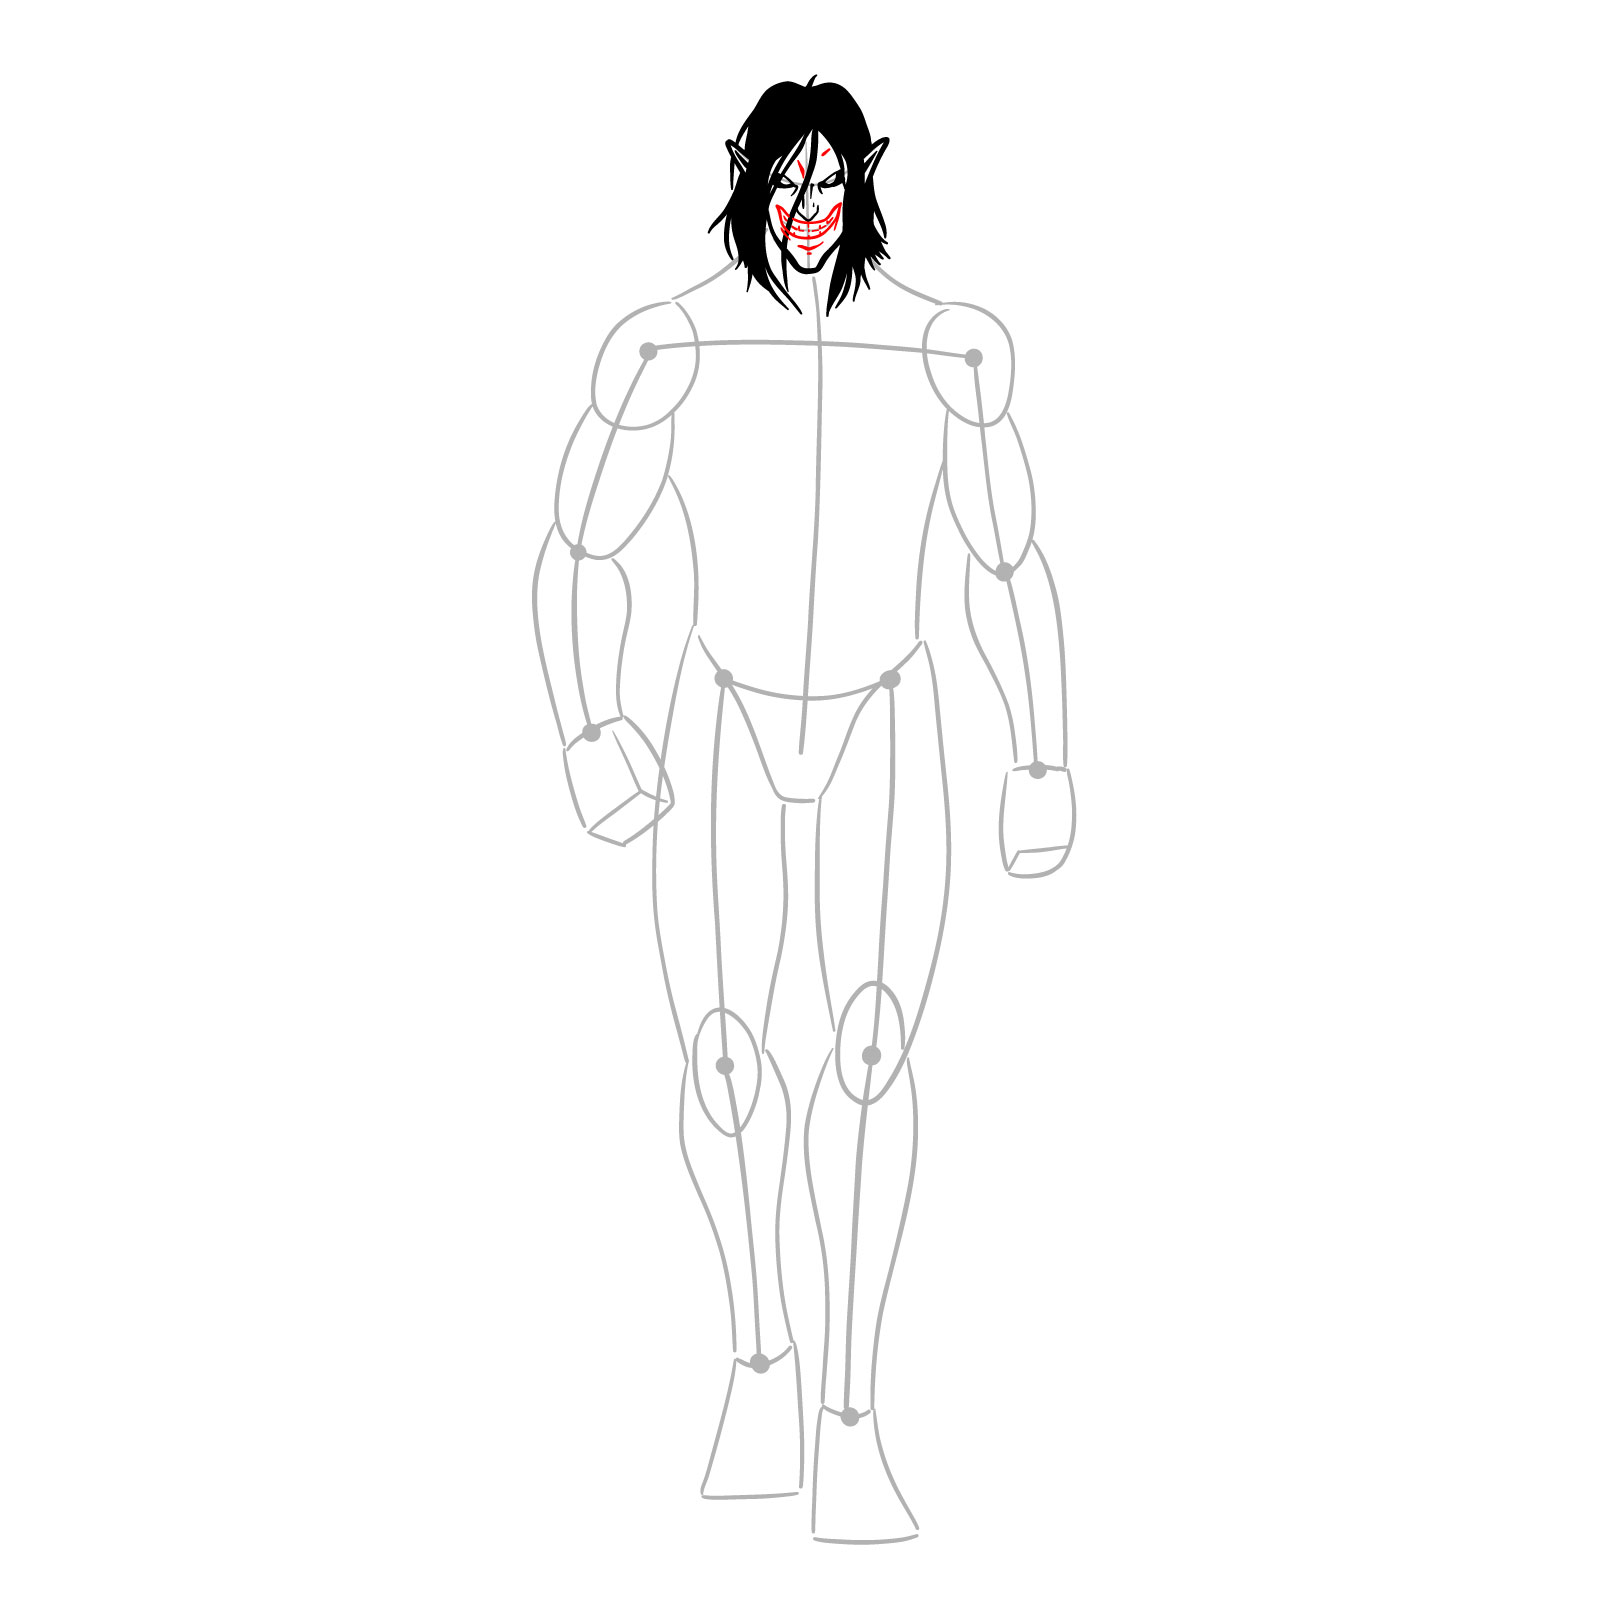 How to draw Eren Jaeger's Titan form full body - step 10